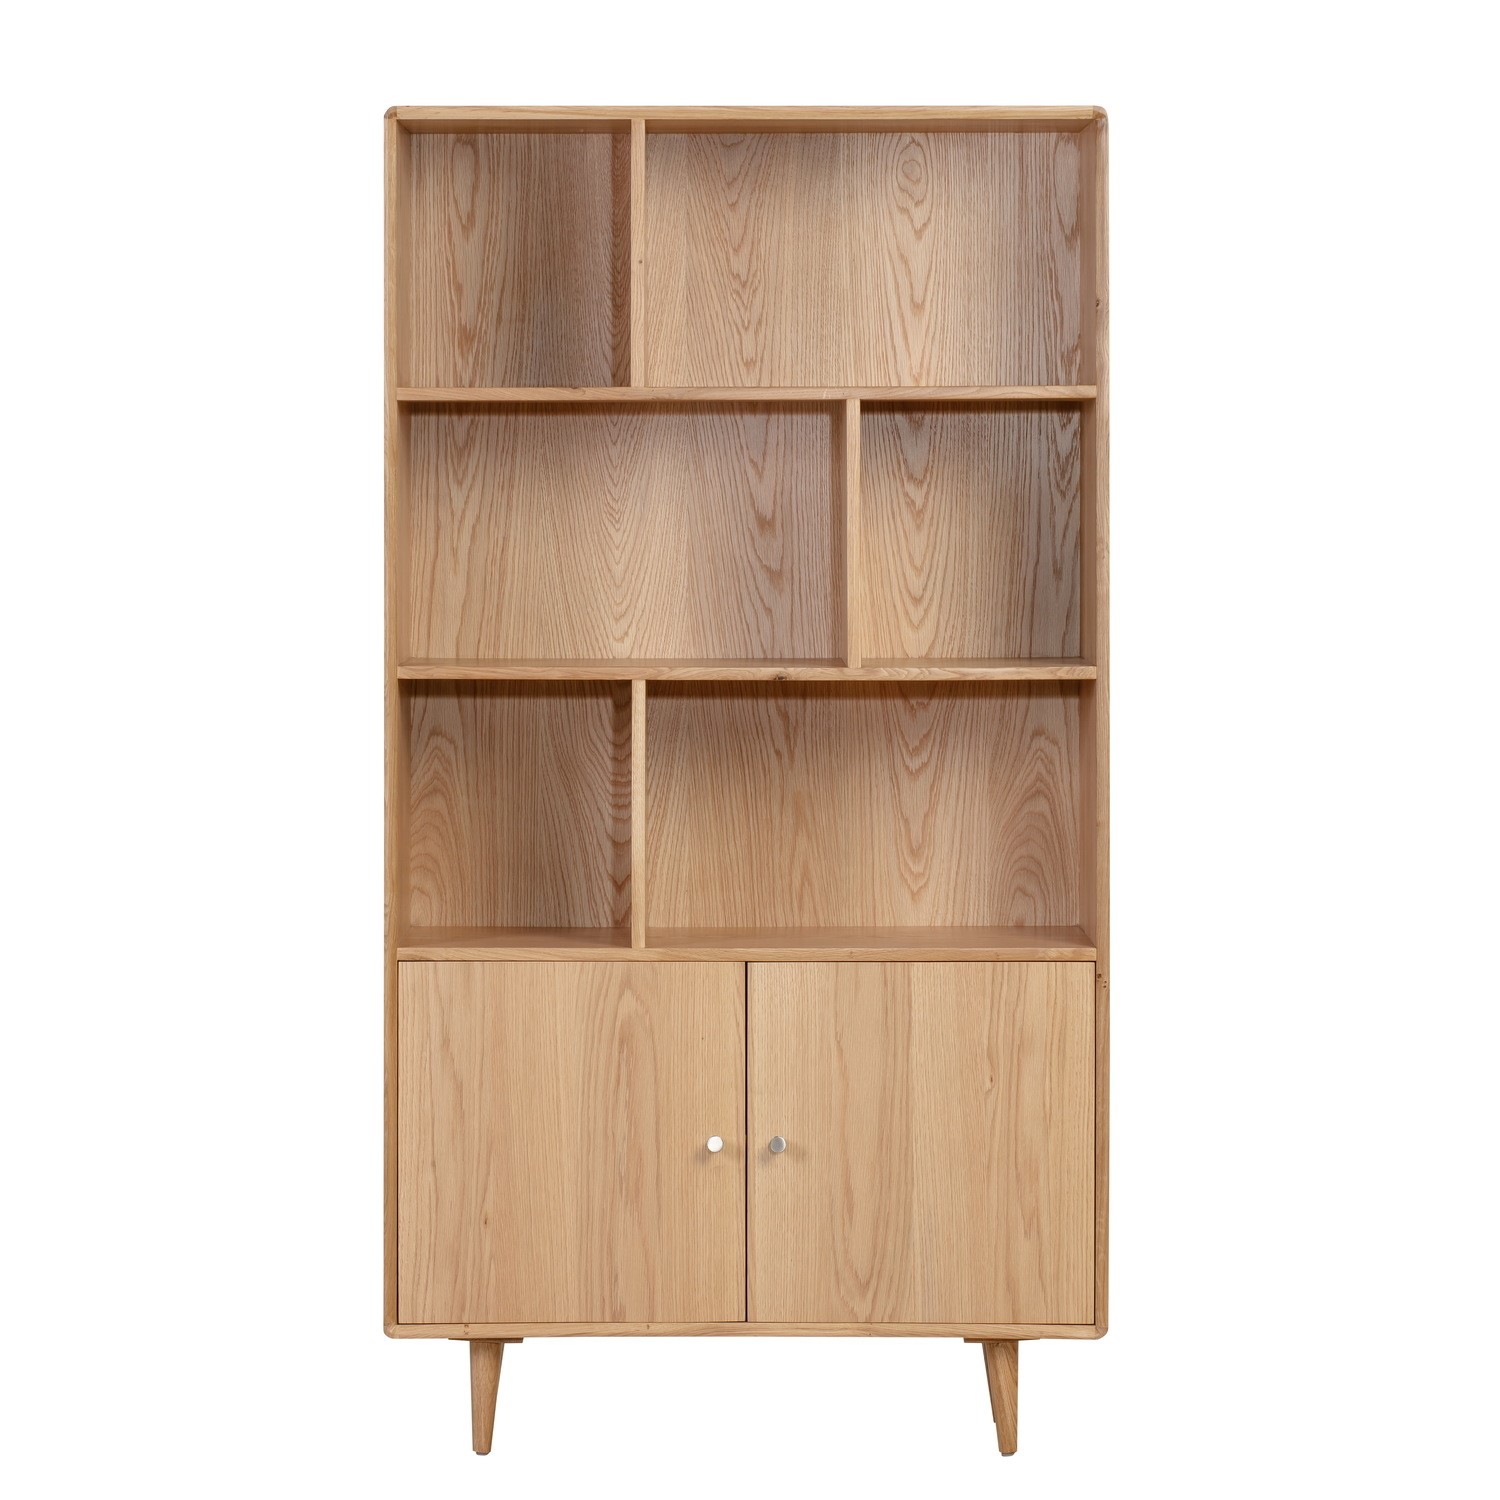 Photo of Solid oak bookcase with 2 doors - marny